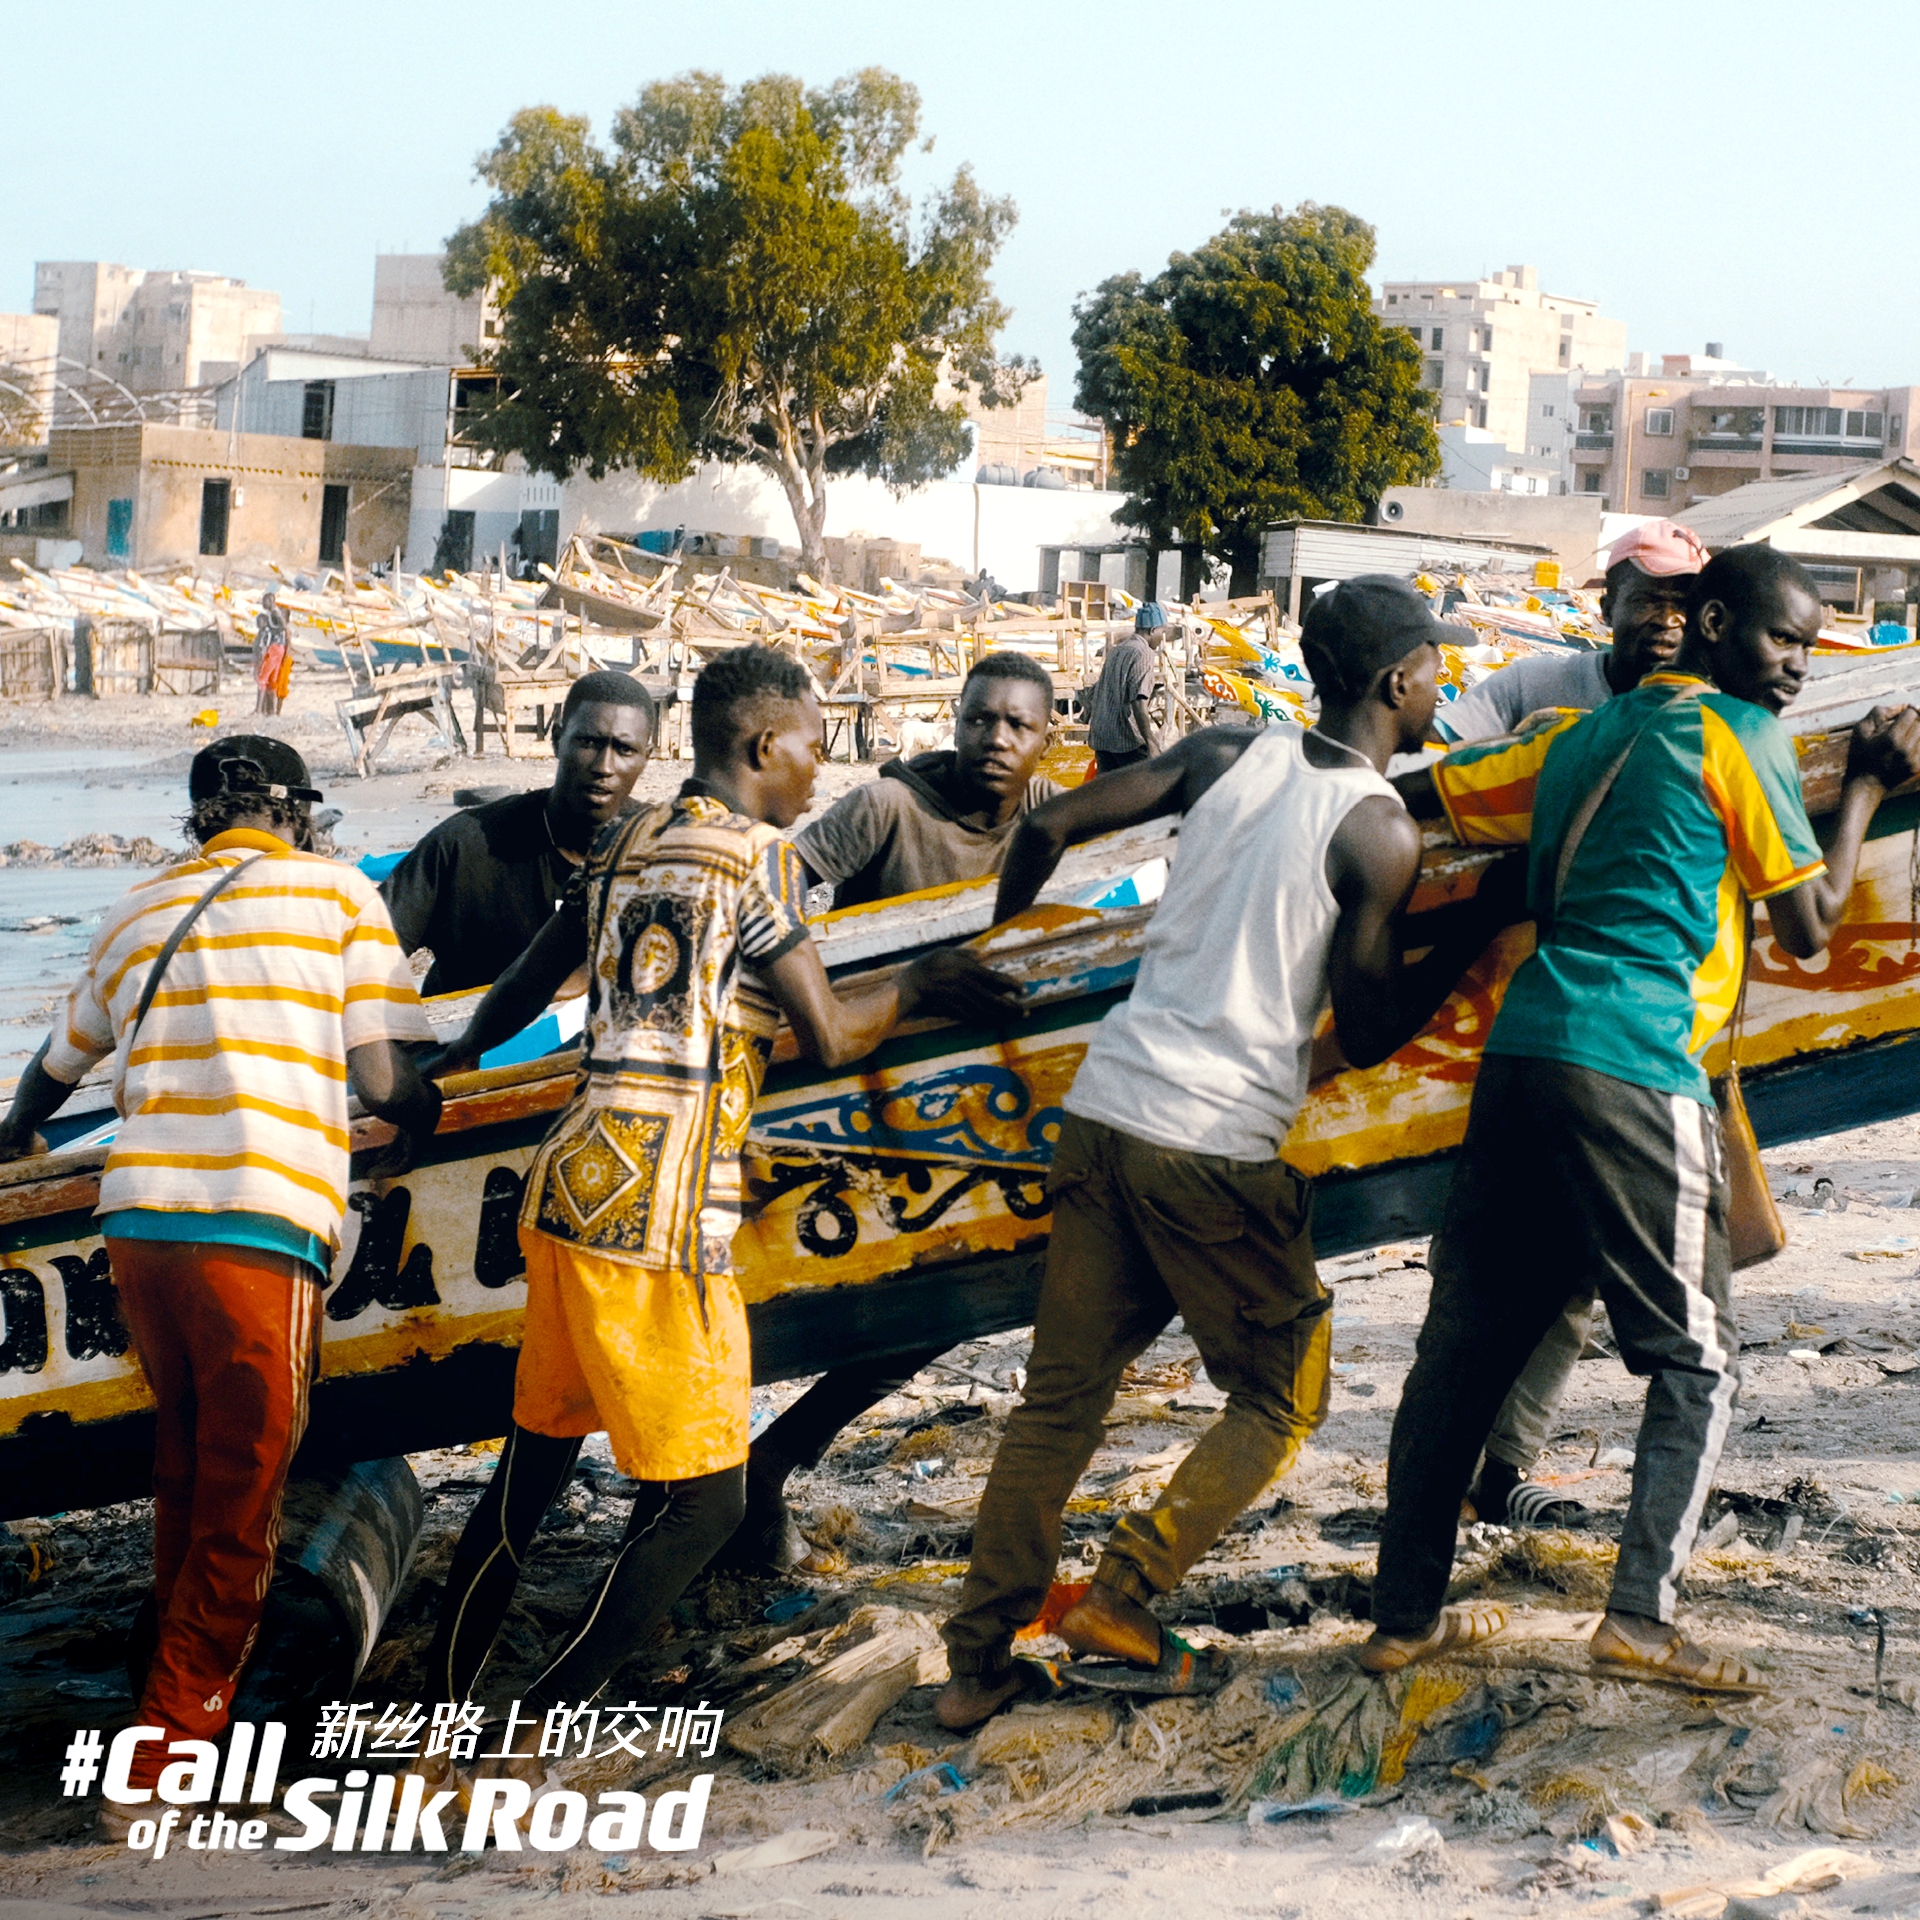 This undated photo shows a group of fishermen in Dakar /CGTN